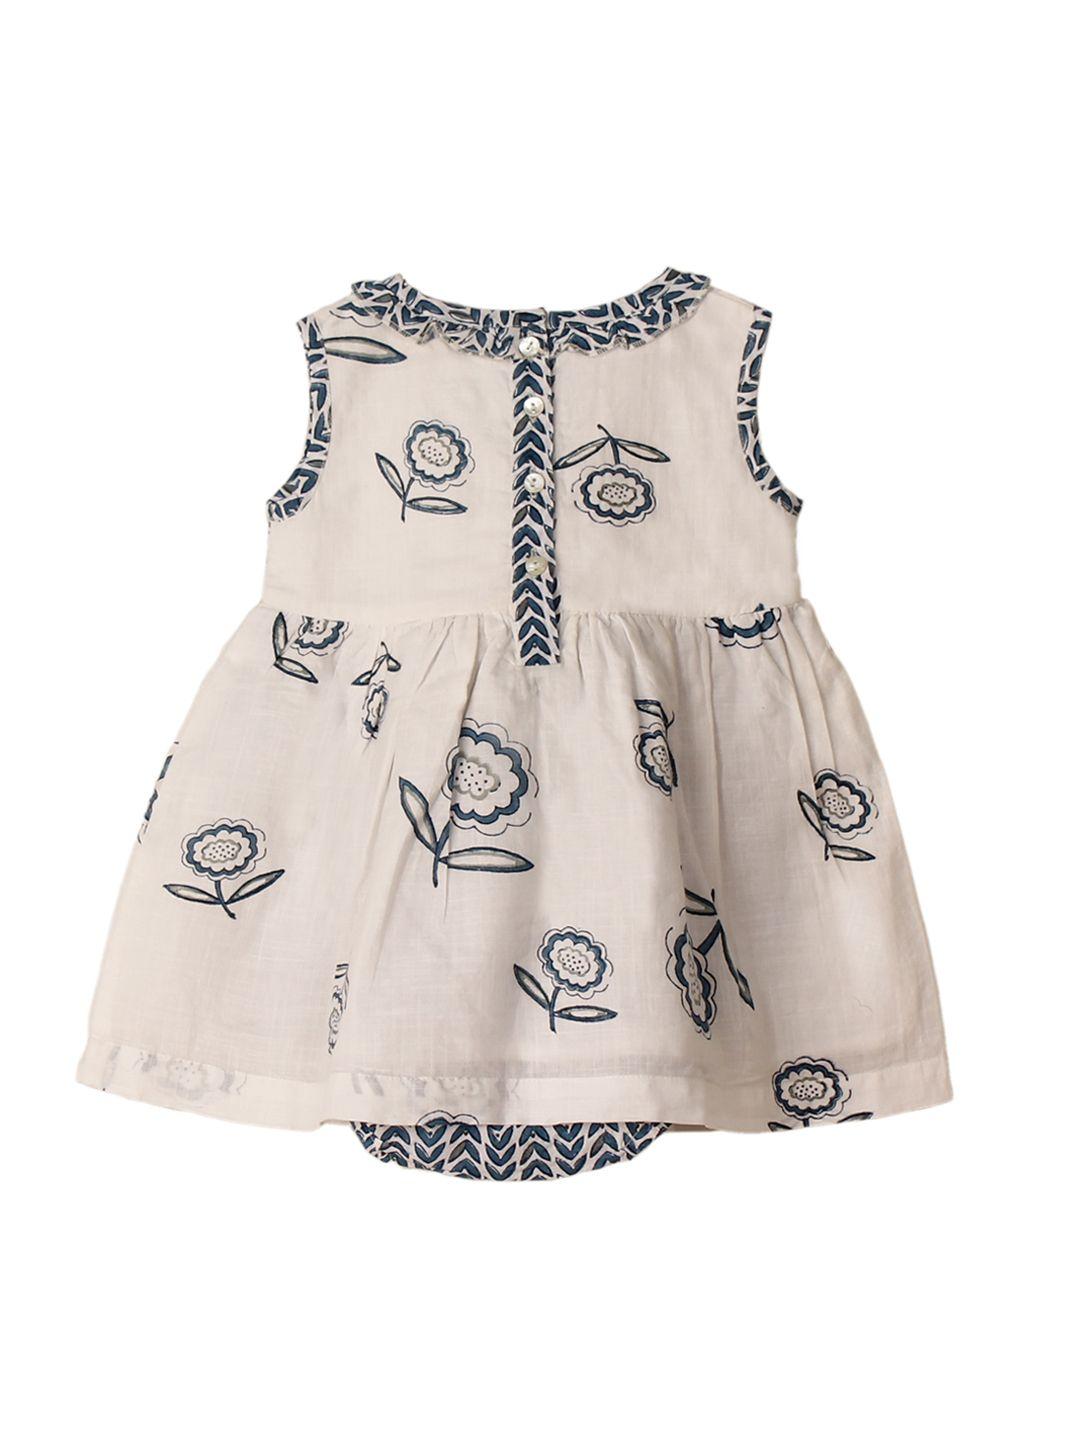 my-little-lambs-kids-beige-&-blue-printed-layered-rompers